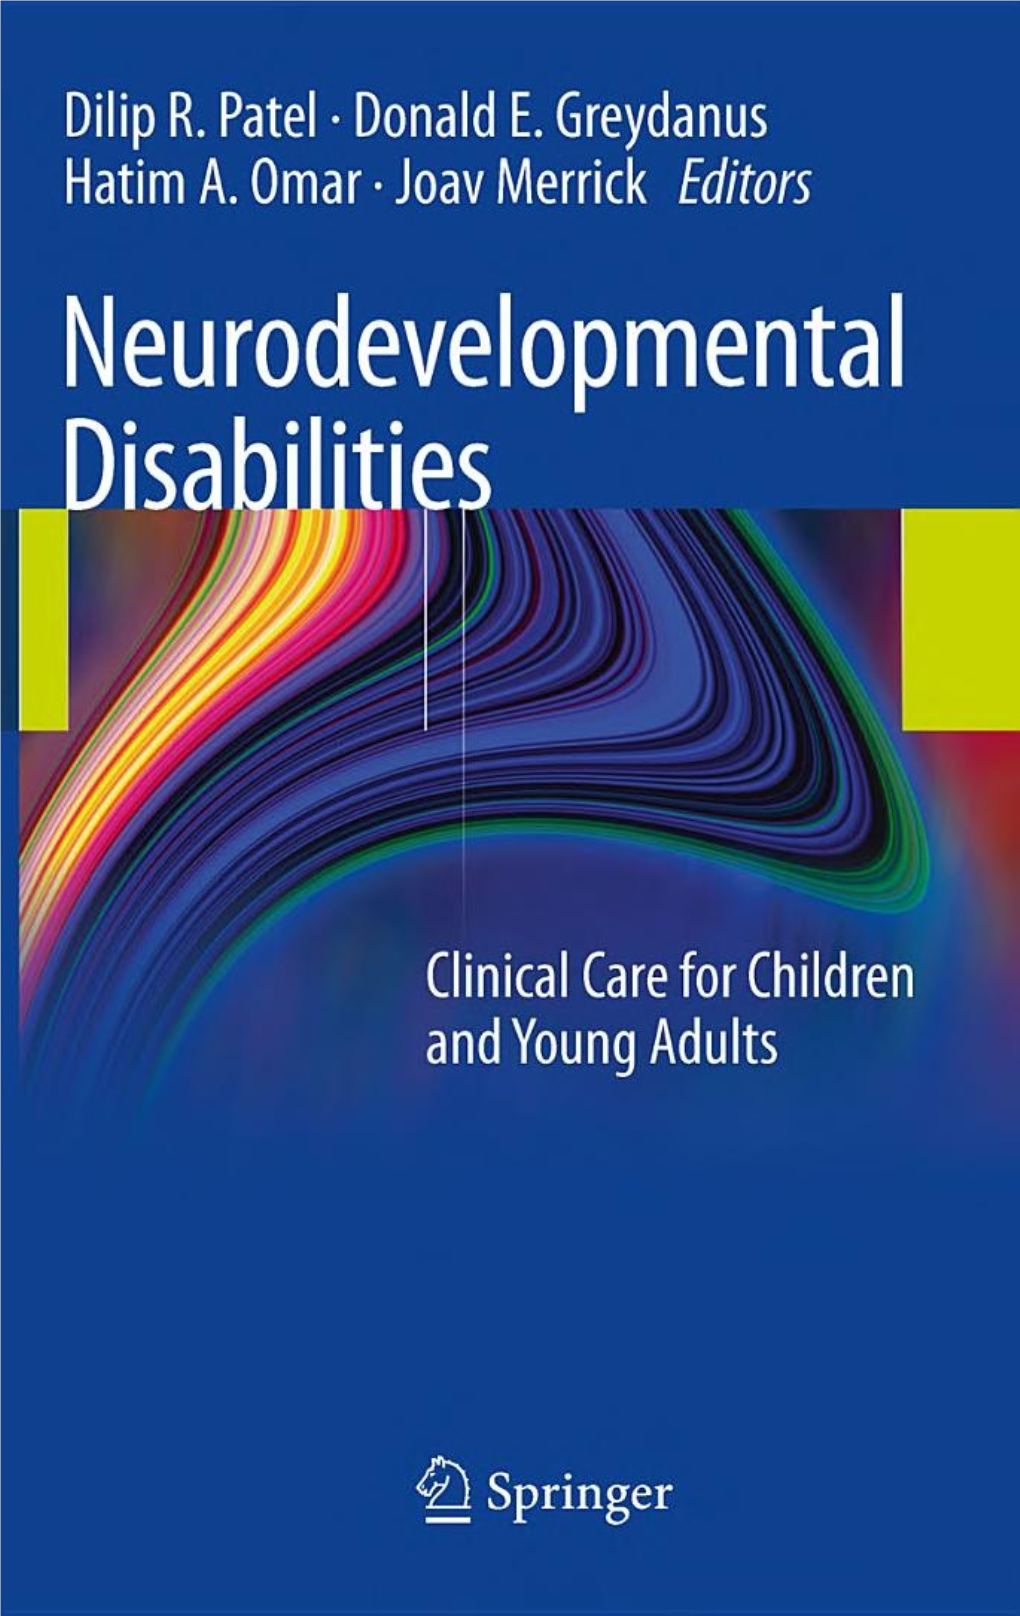 Neurodevelopmental Disabilities: Clinical Care for Children and Young Adults Edited by Patel, Greydanus, Omar, and Merrick